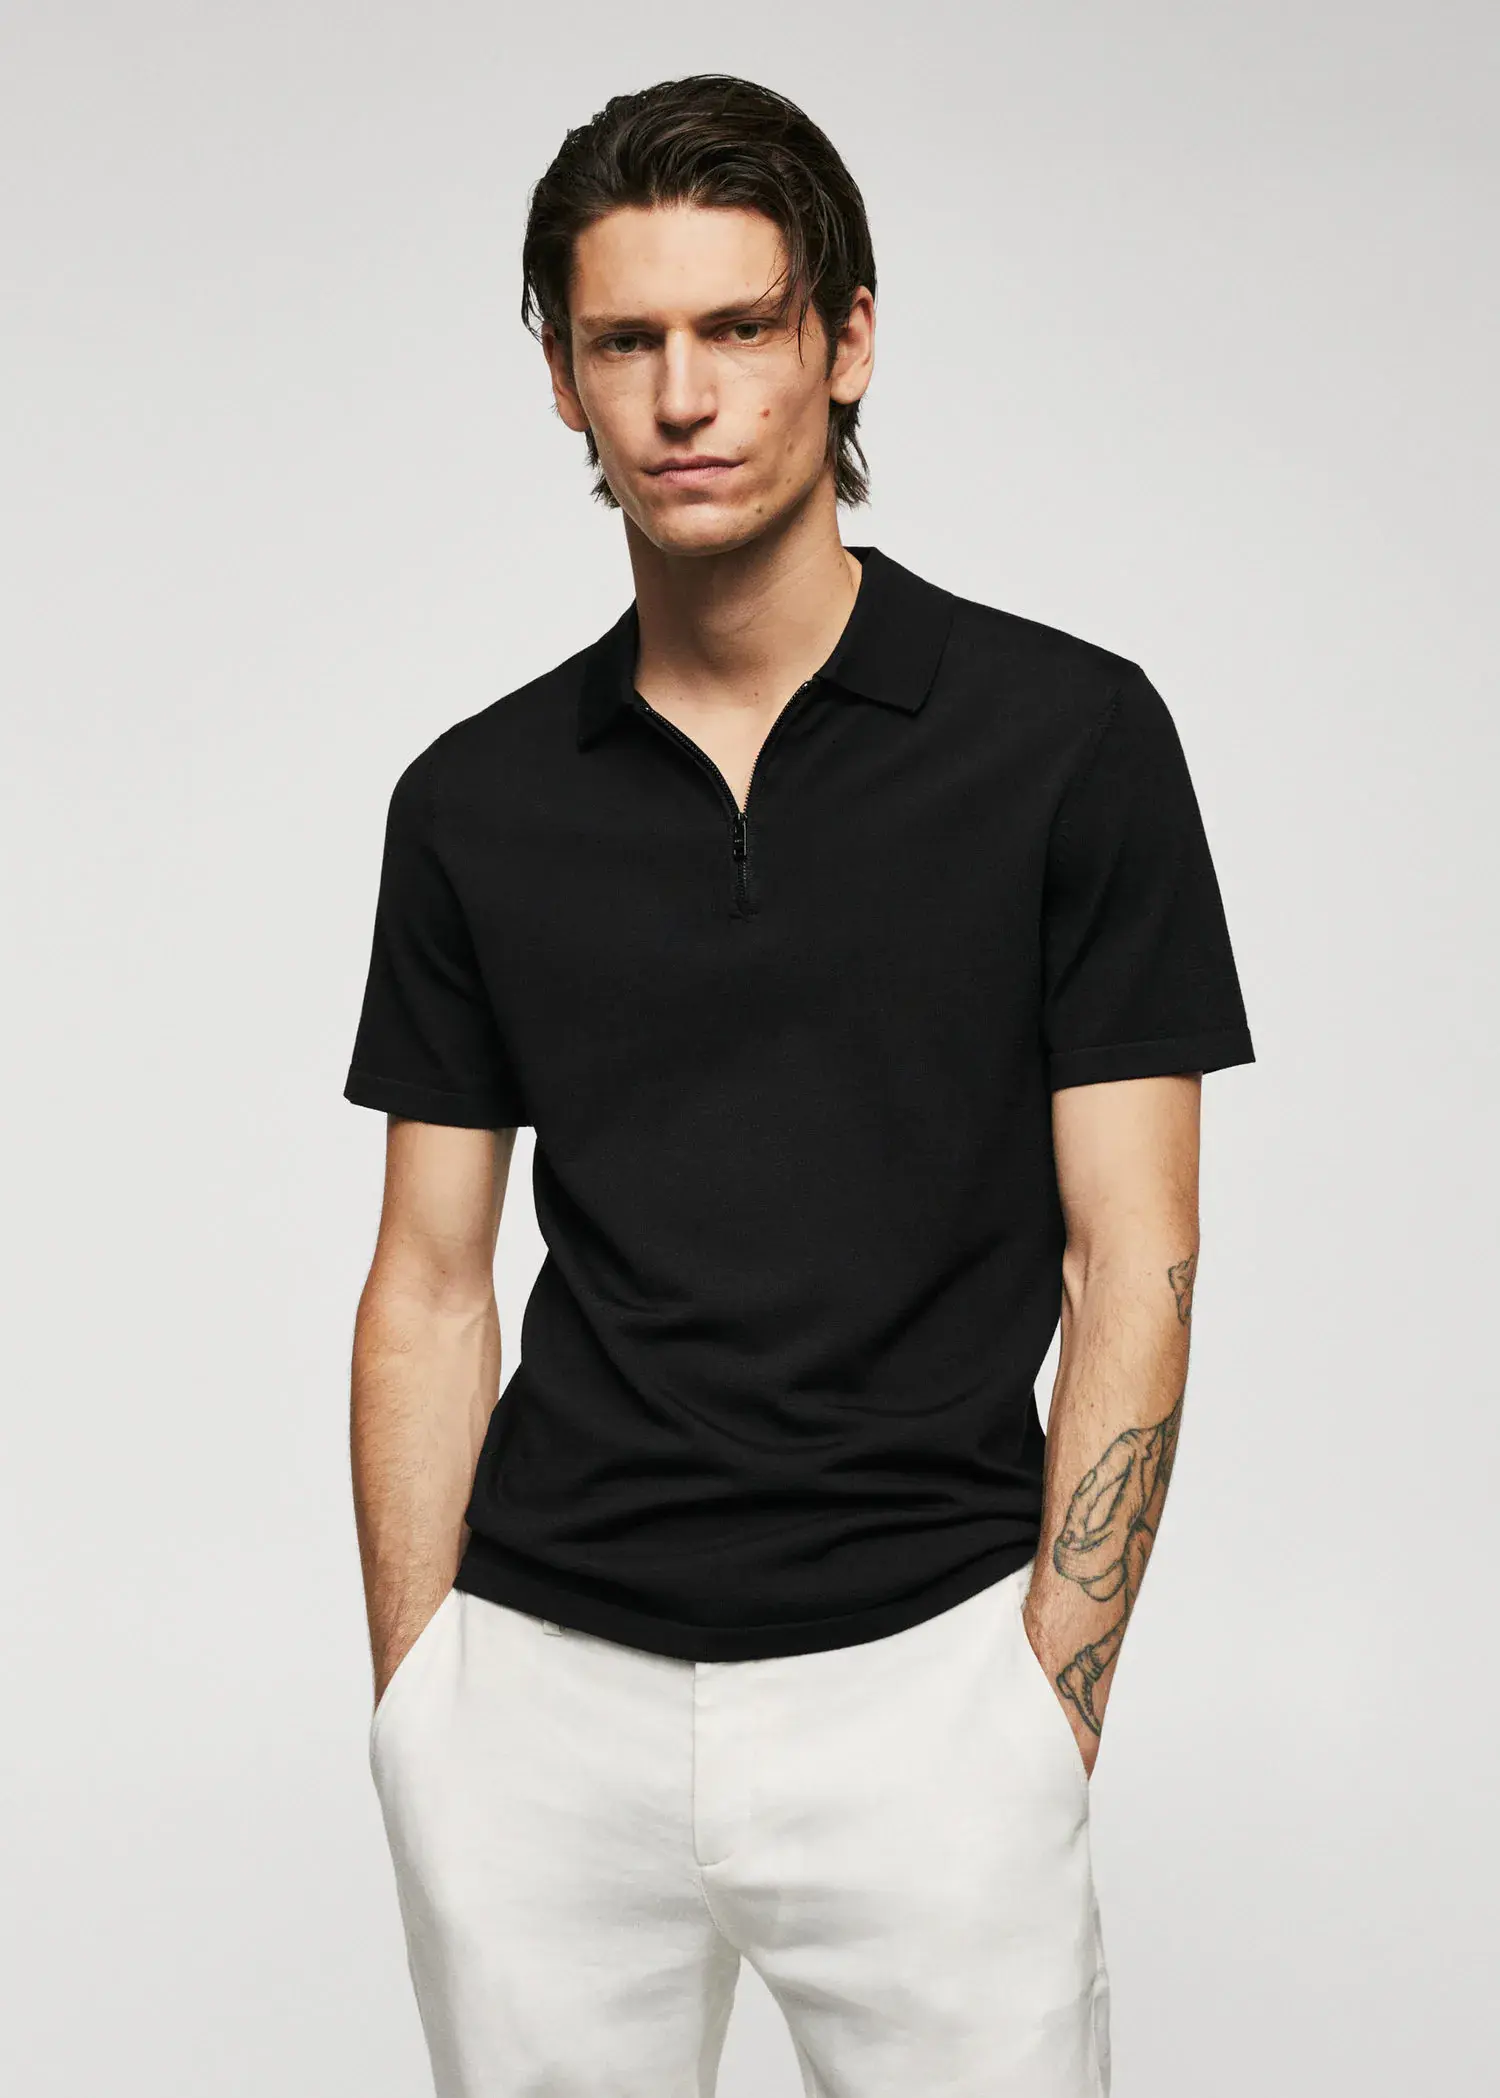 Mango Fine-knit polo shirt with zip. a man in a black polo shirt and white pants. 